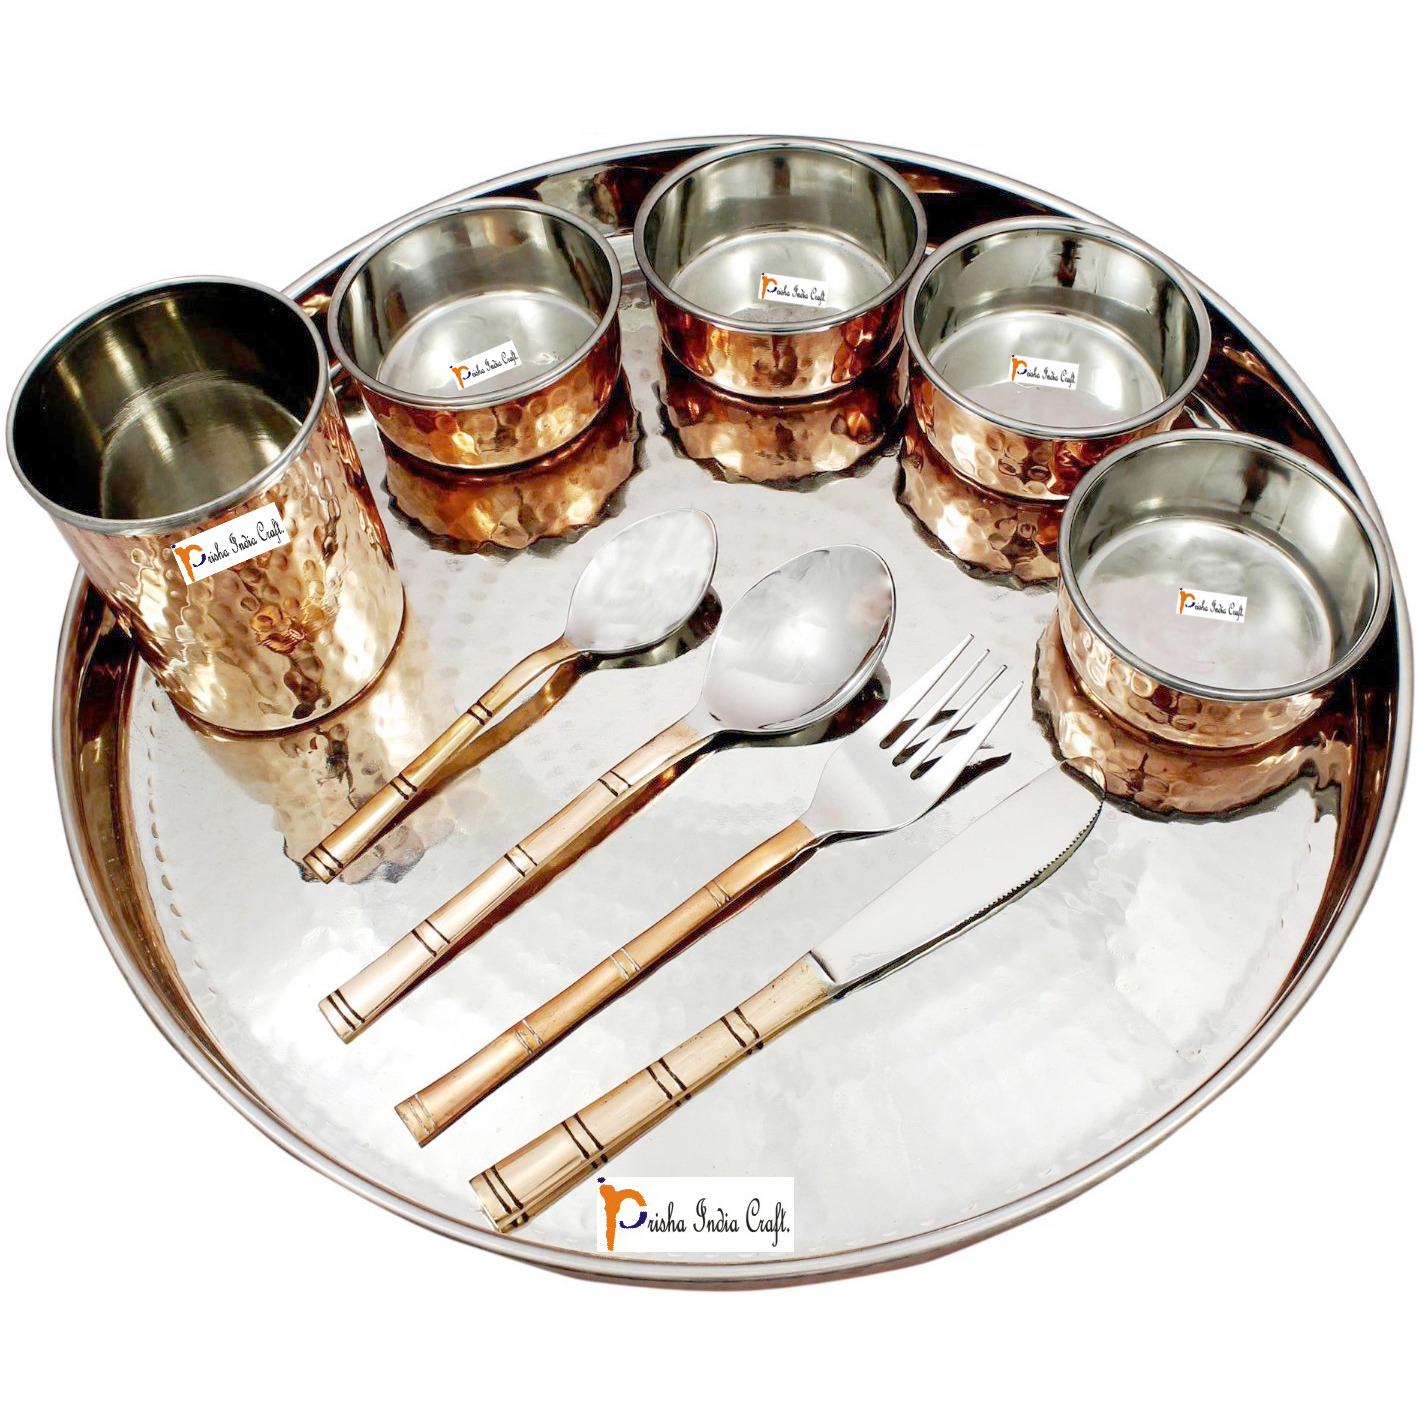 Prisha India Craft B. Set of 2 Dinnerware Traditional Stainless Steel Copper Dinner Set of Thali Plate, Bowls, Glass and Spoons, Dia 13  With 1 Pure Copper Mughal Pitcher Jug - Christmas Gift